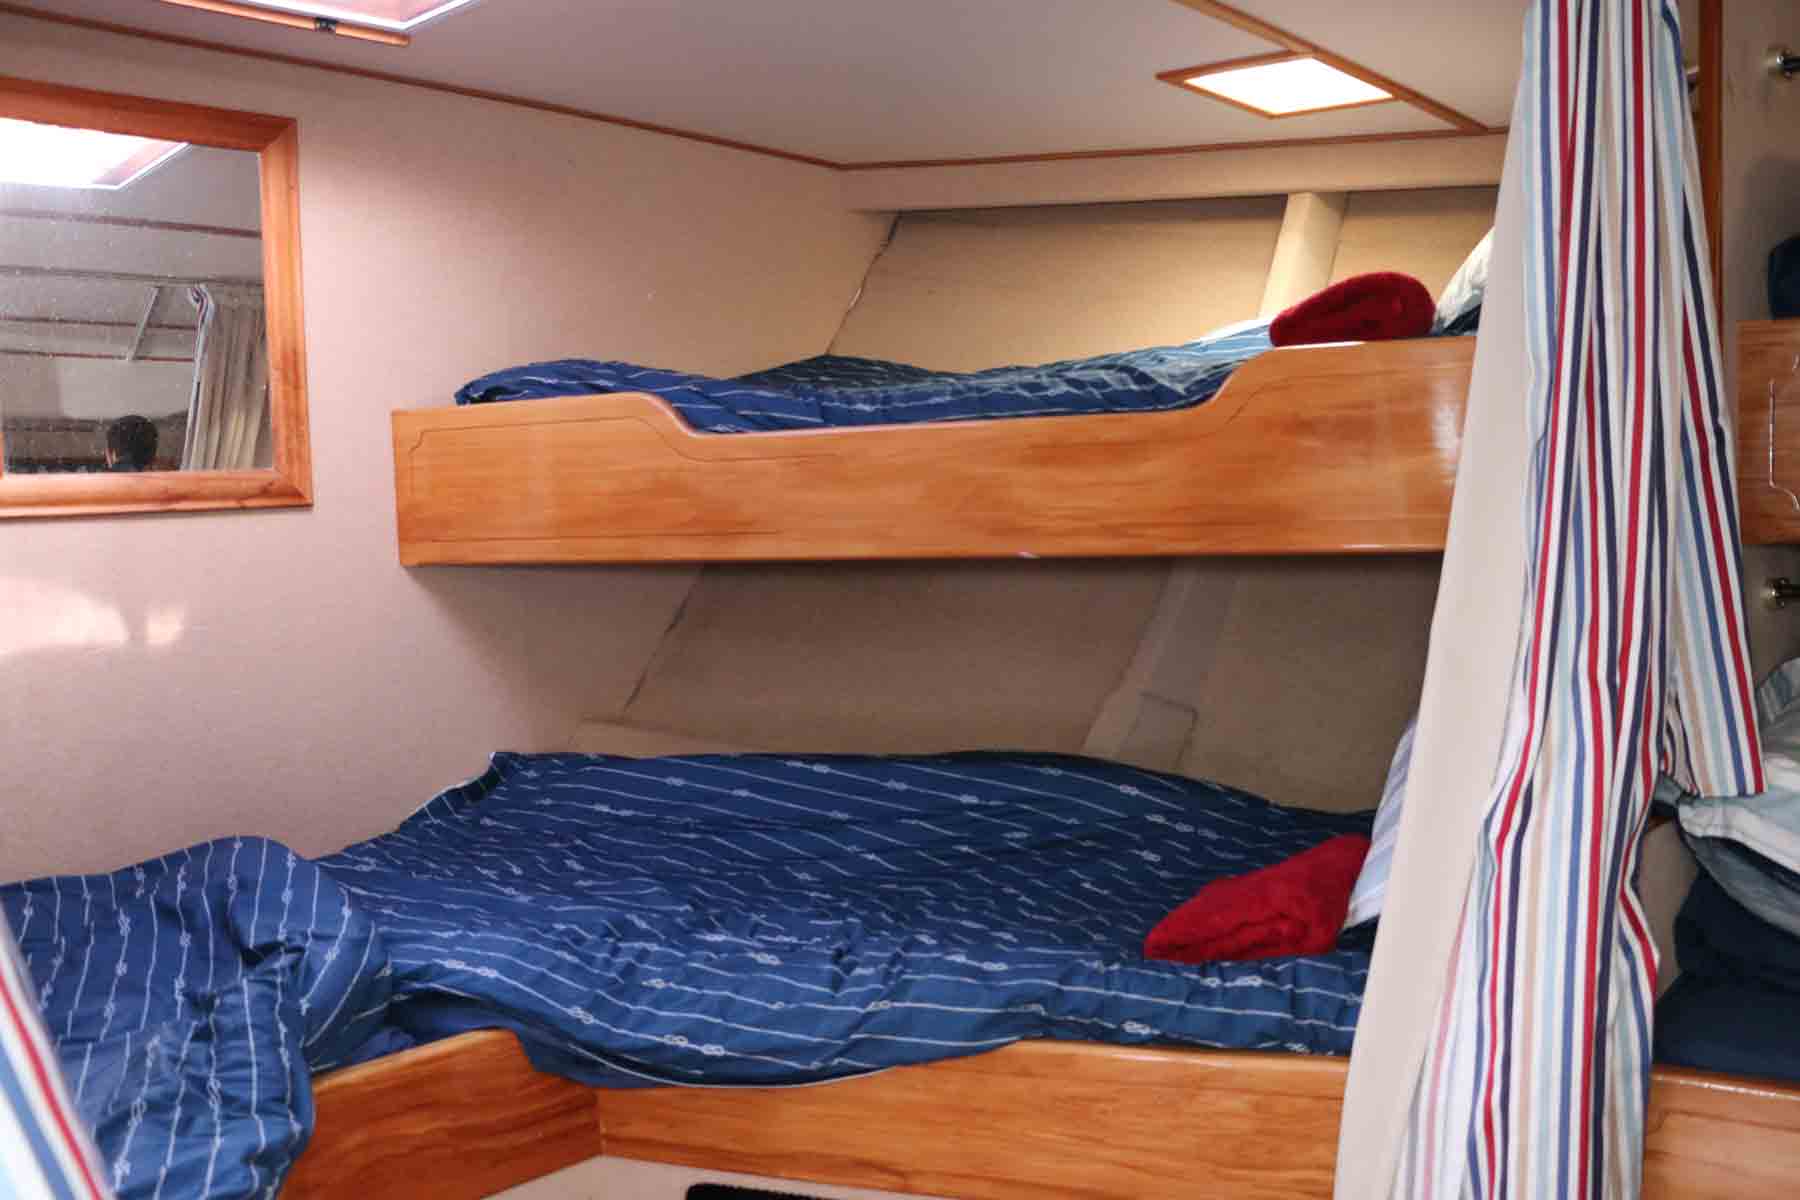 The beds onboard the Galileo are comfortable and spacious